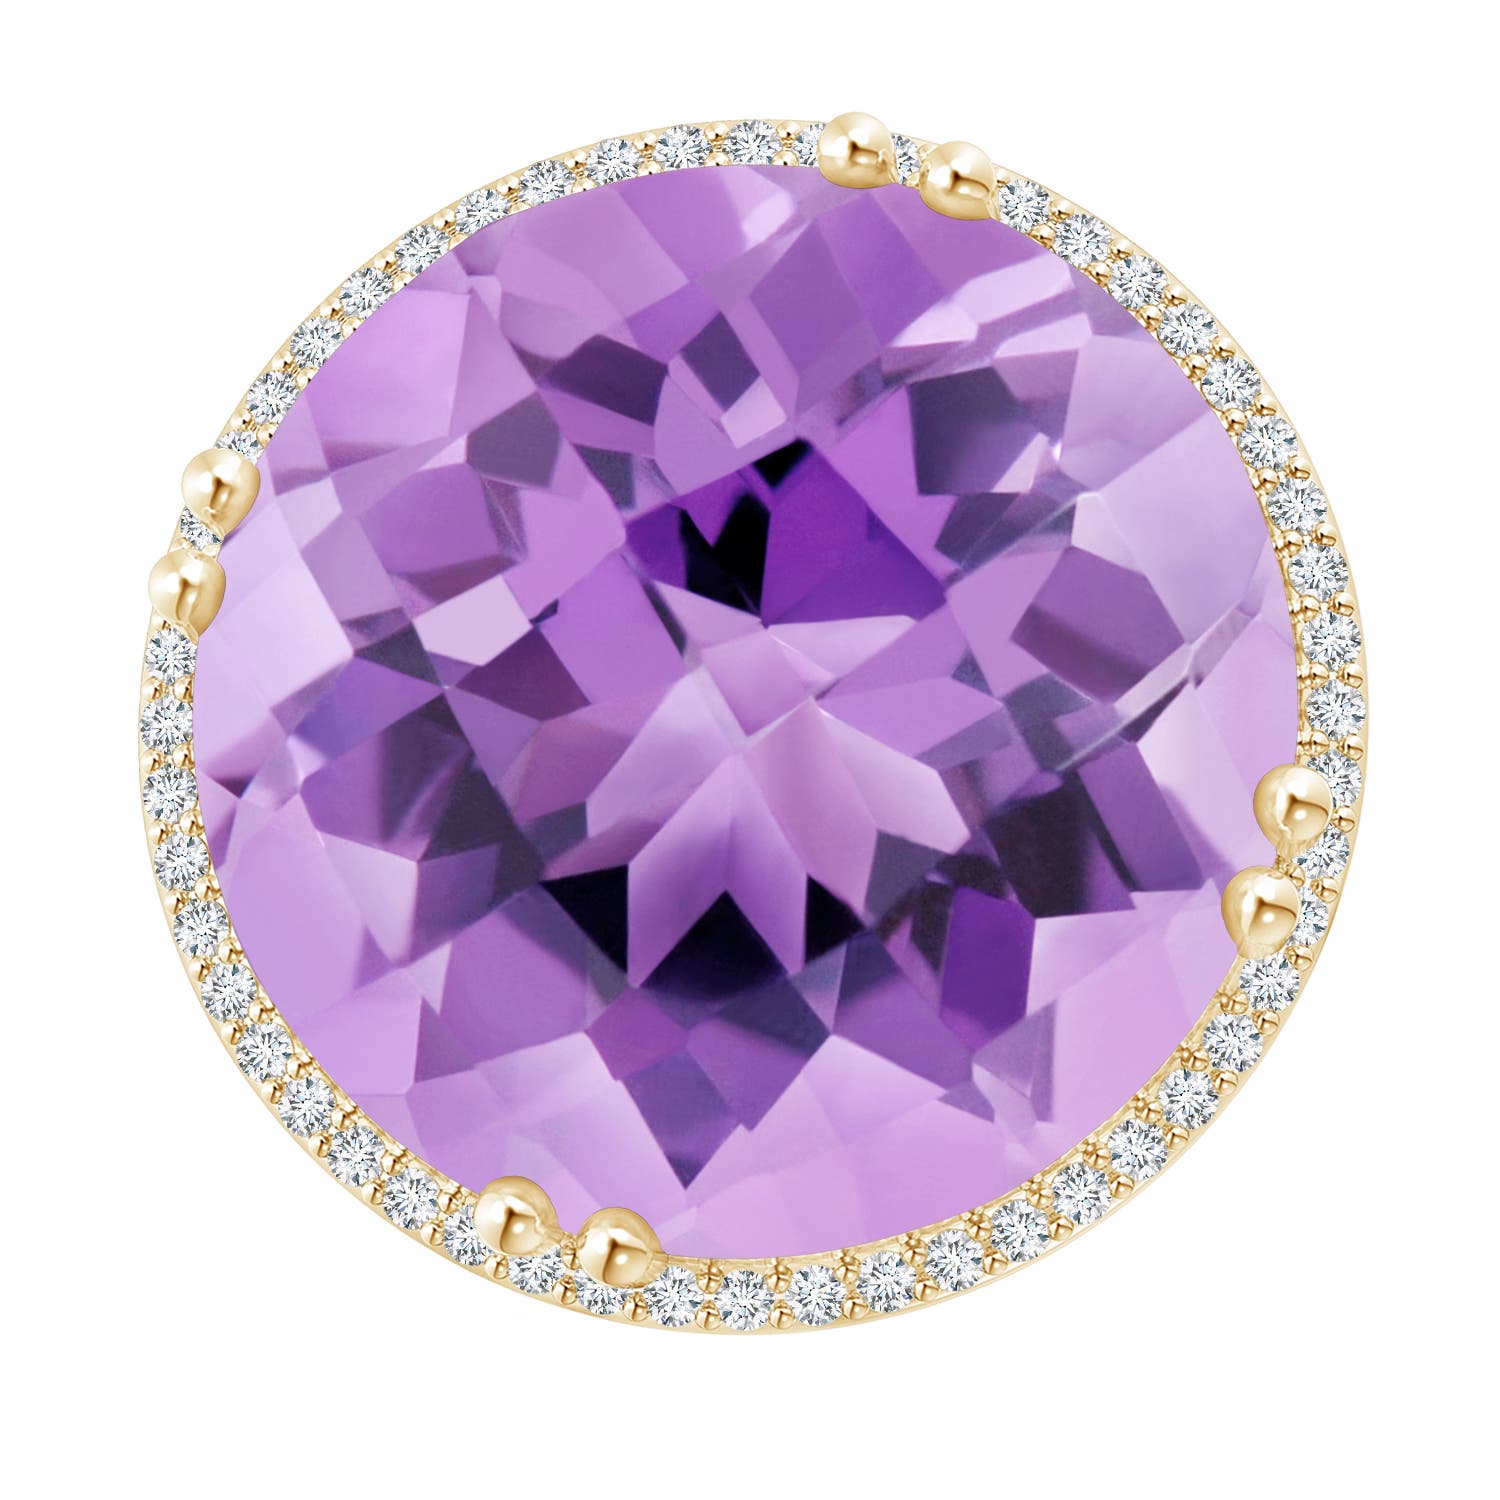 A - Amethyst / 21.26 CT / 14 KT Yellow Gold